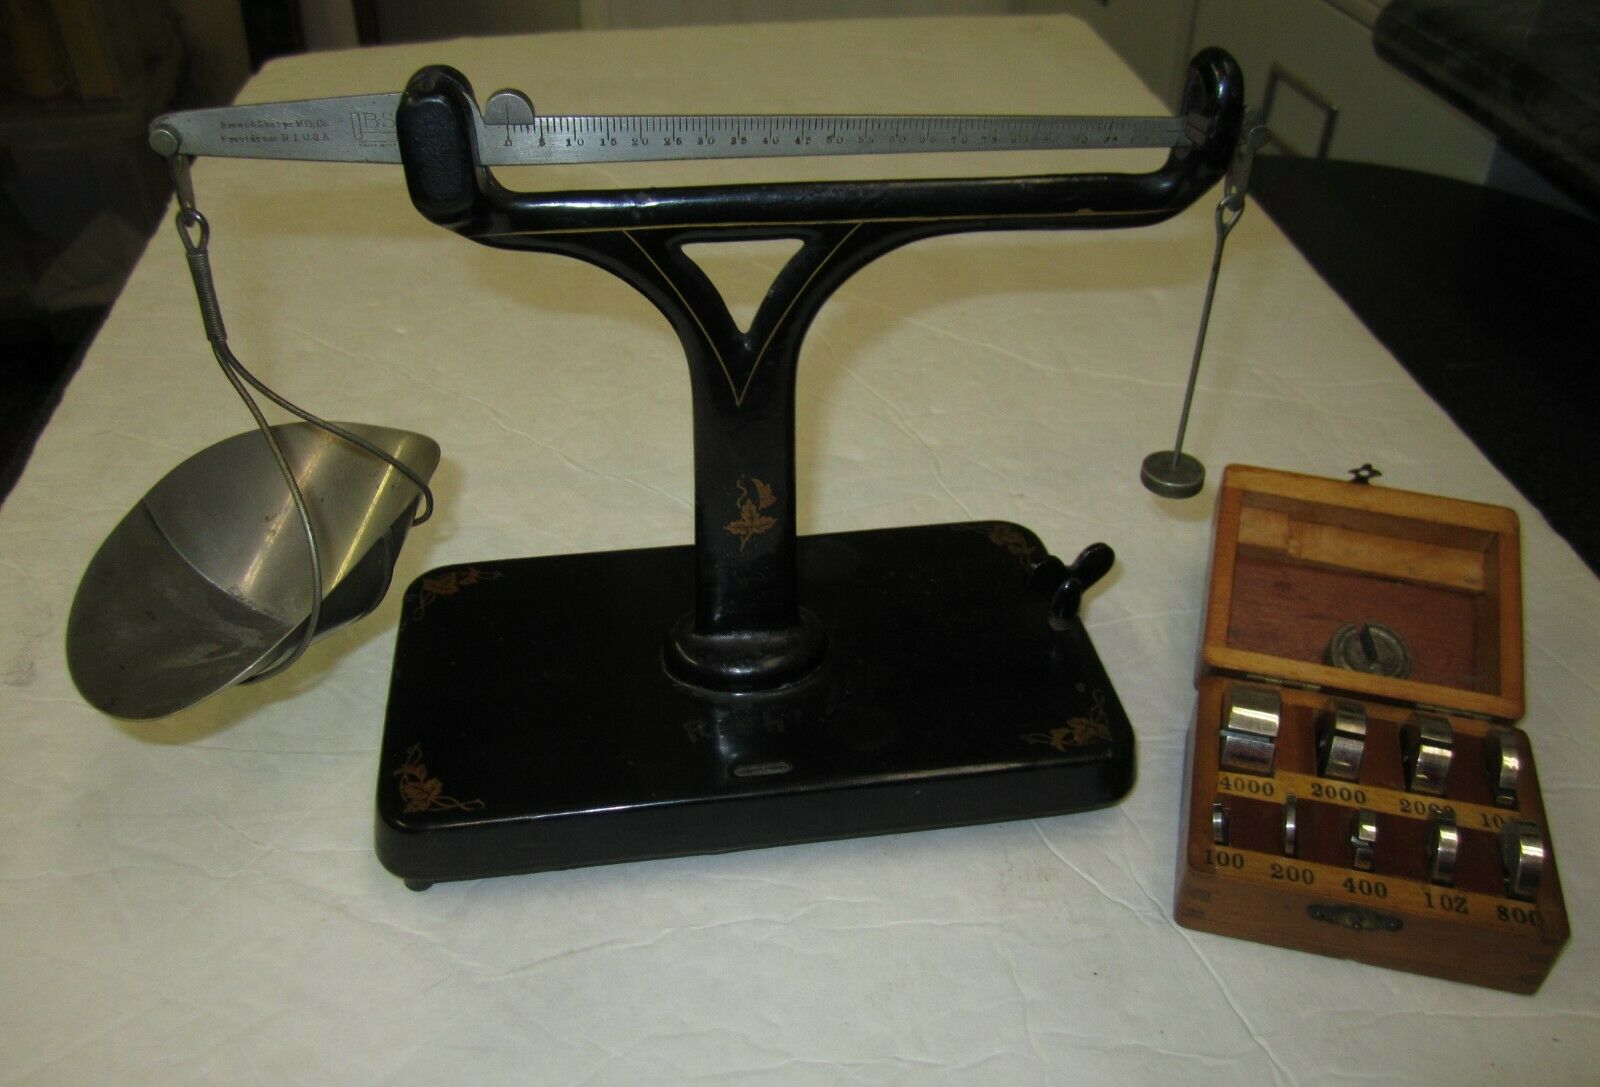 Antique Brown & Sharpe Apothecary Scale With Weights & Box - Circa Early 1900's